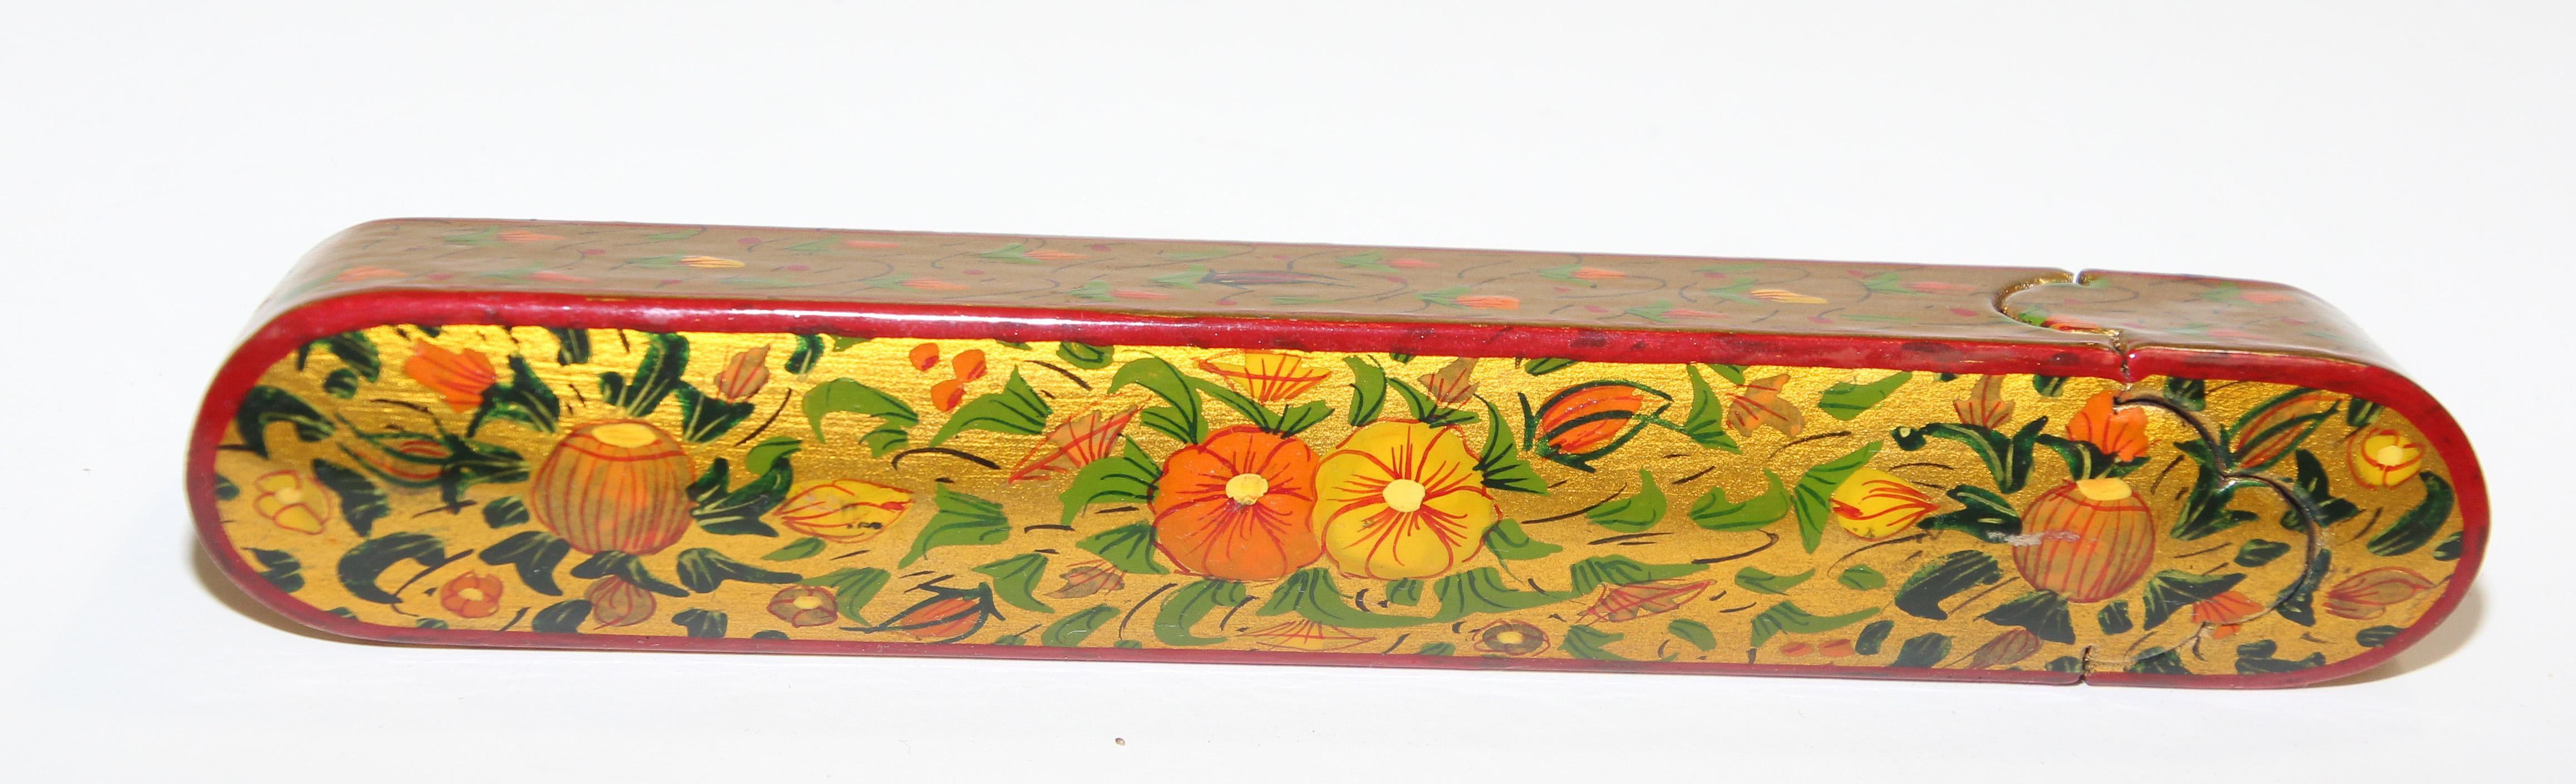 Moorish Persian Lacquer Pen Box Hand Painted with Floral and Gilt Design For Sale